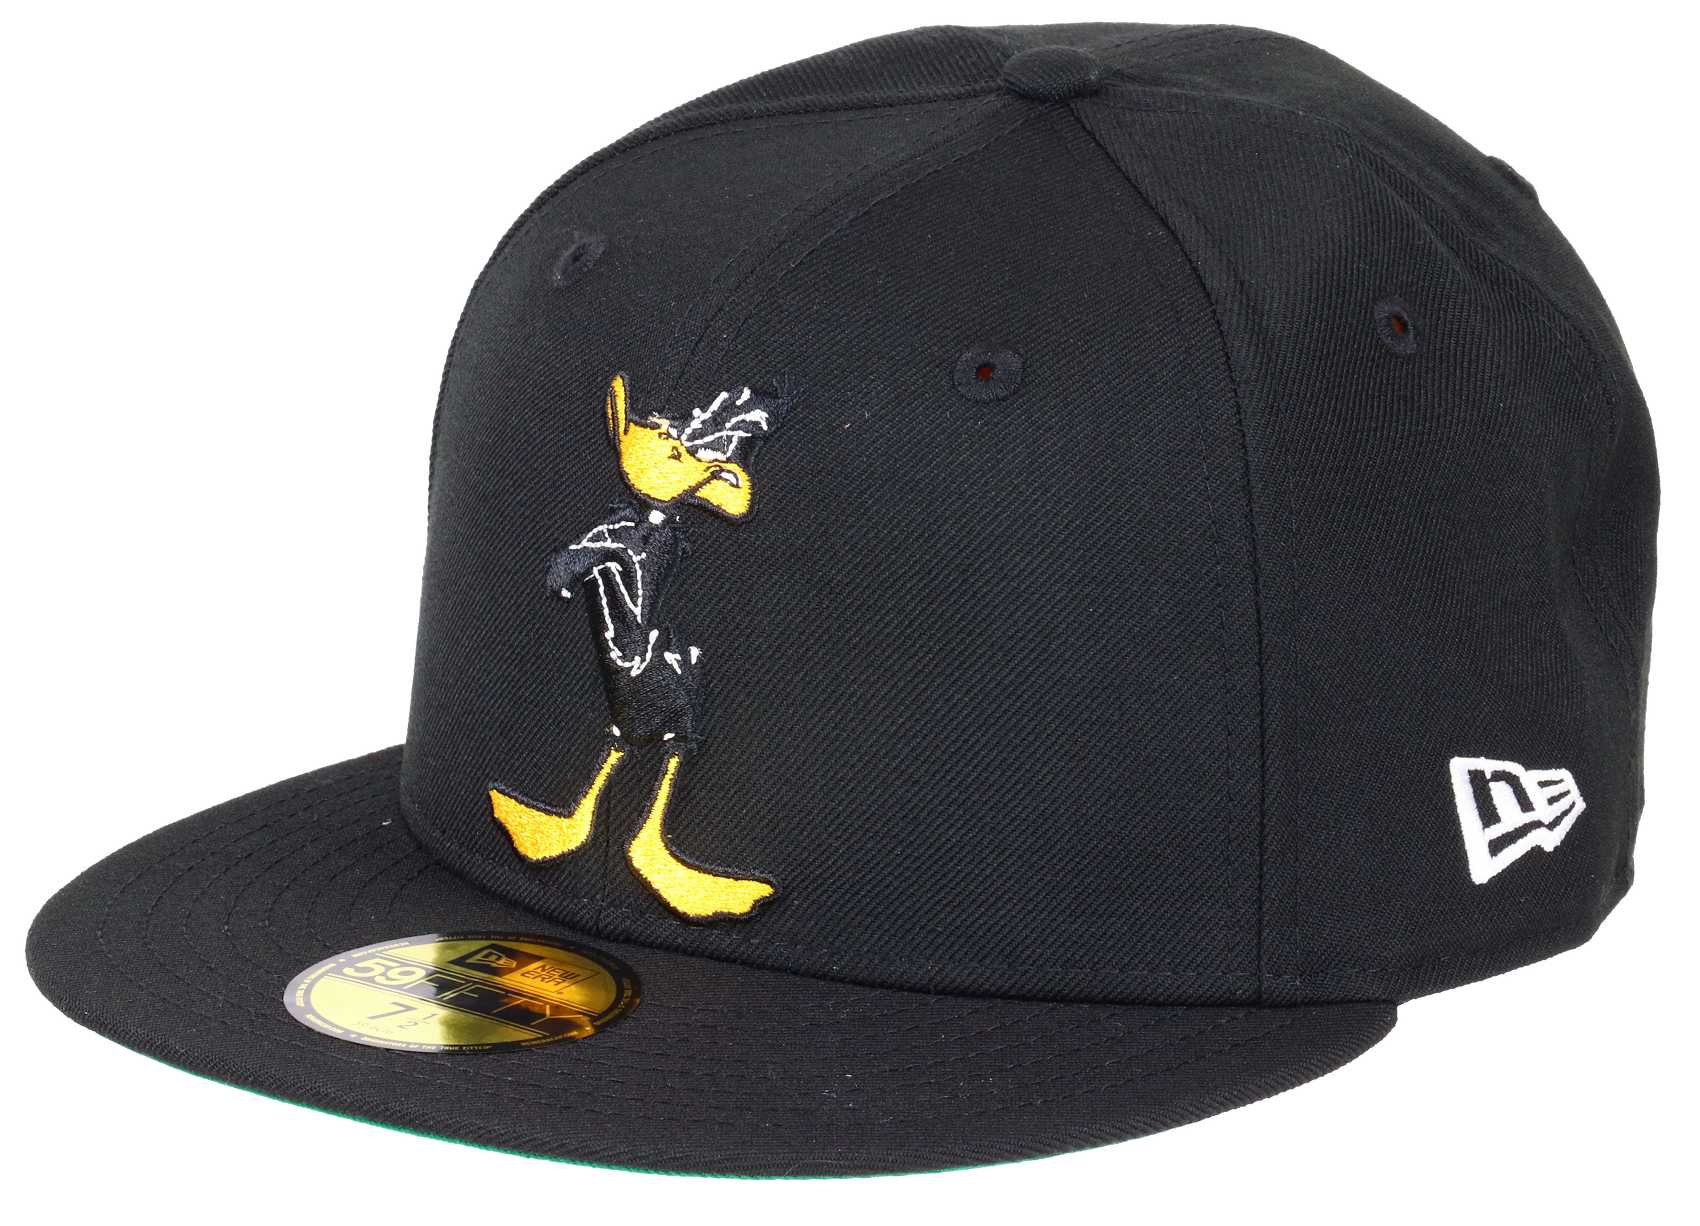 Daffy Duck Black 59Fifty Fitted Basecap New Era